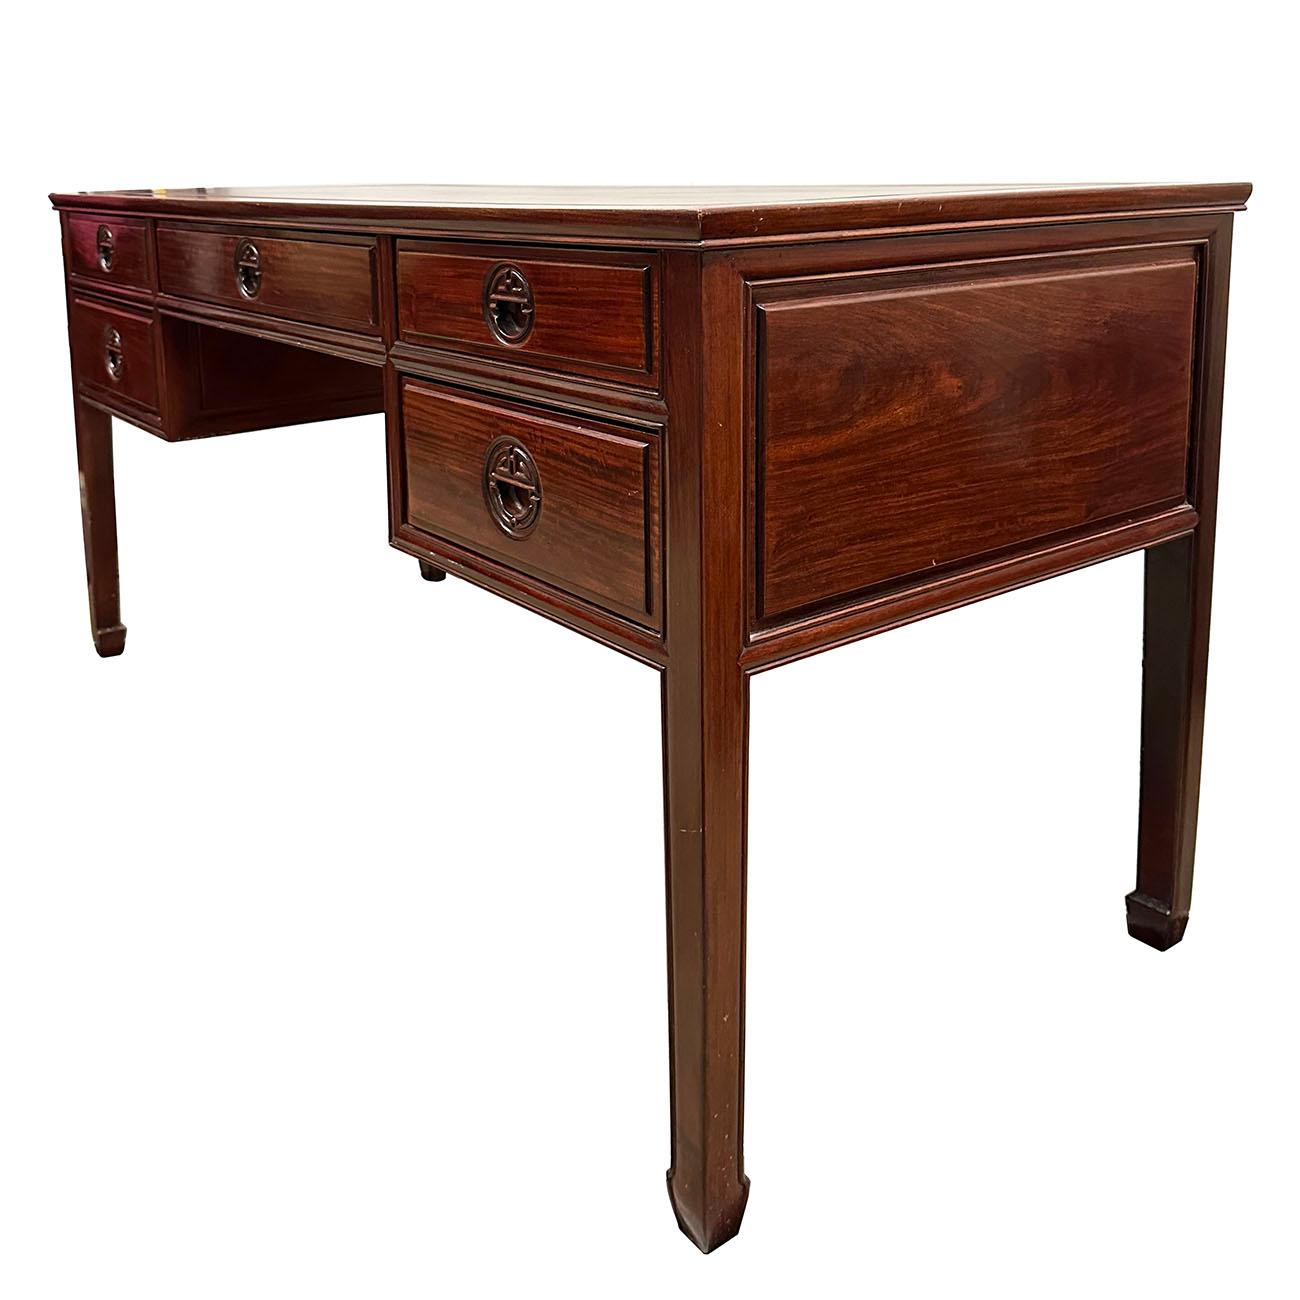 This unique writing desk has two drawers each side and one bigger drawer at center of the front and both sides and back are nicely finished. This desk was made at about 1950's from solid rosewood with dark finished and has some traditional Chinese